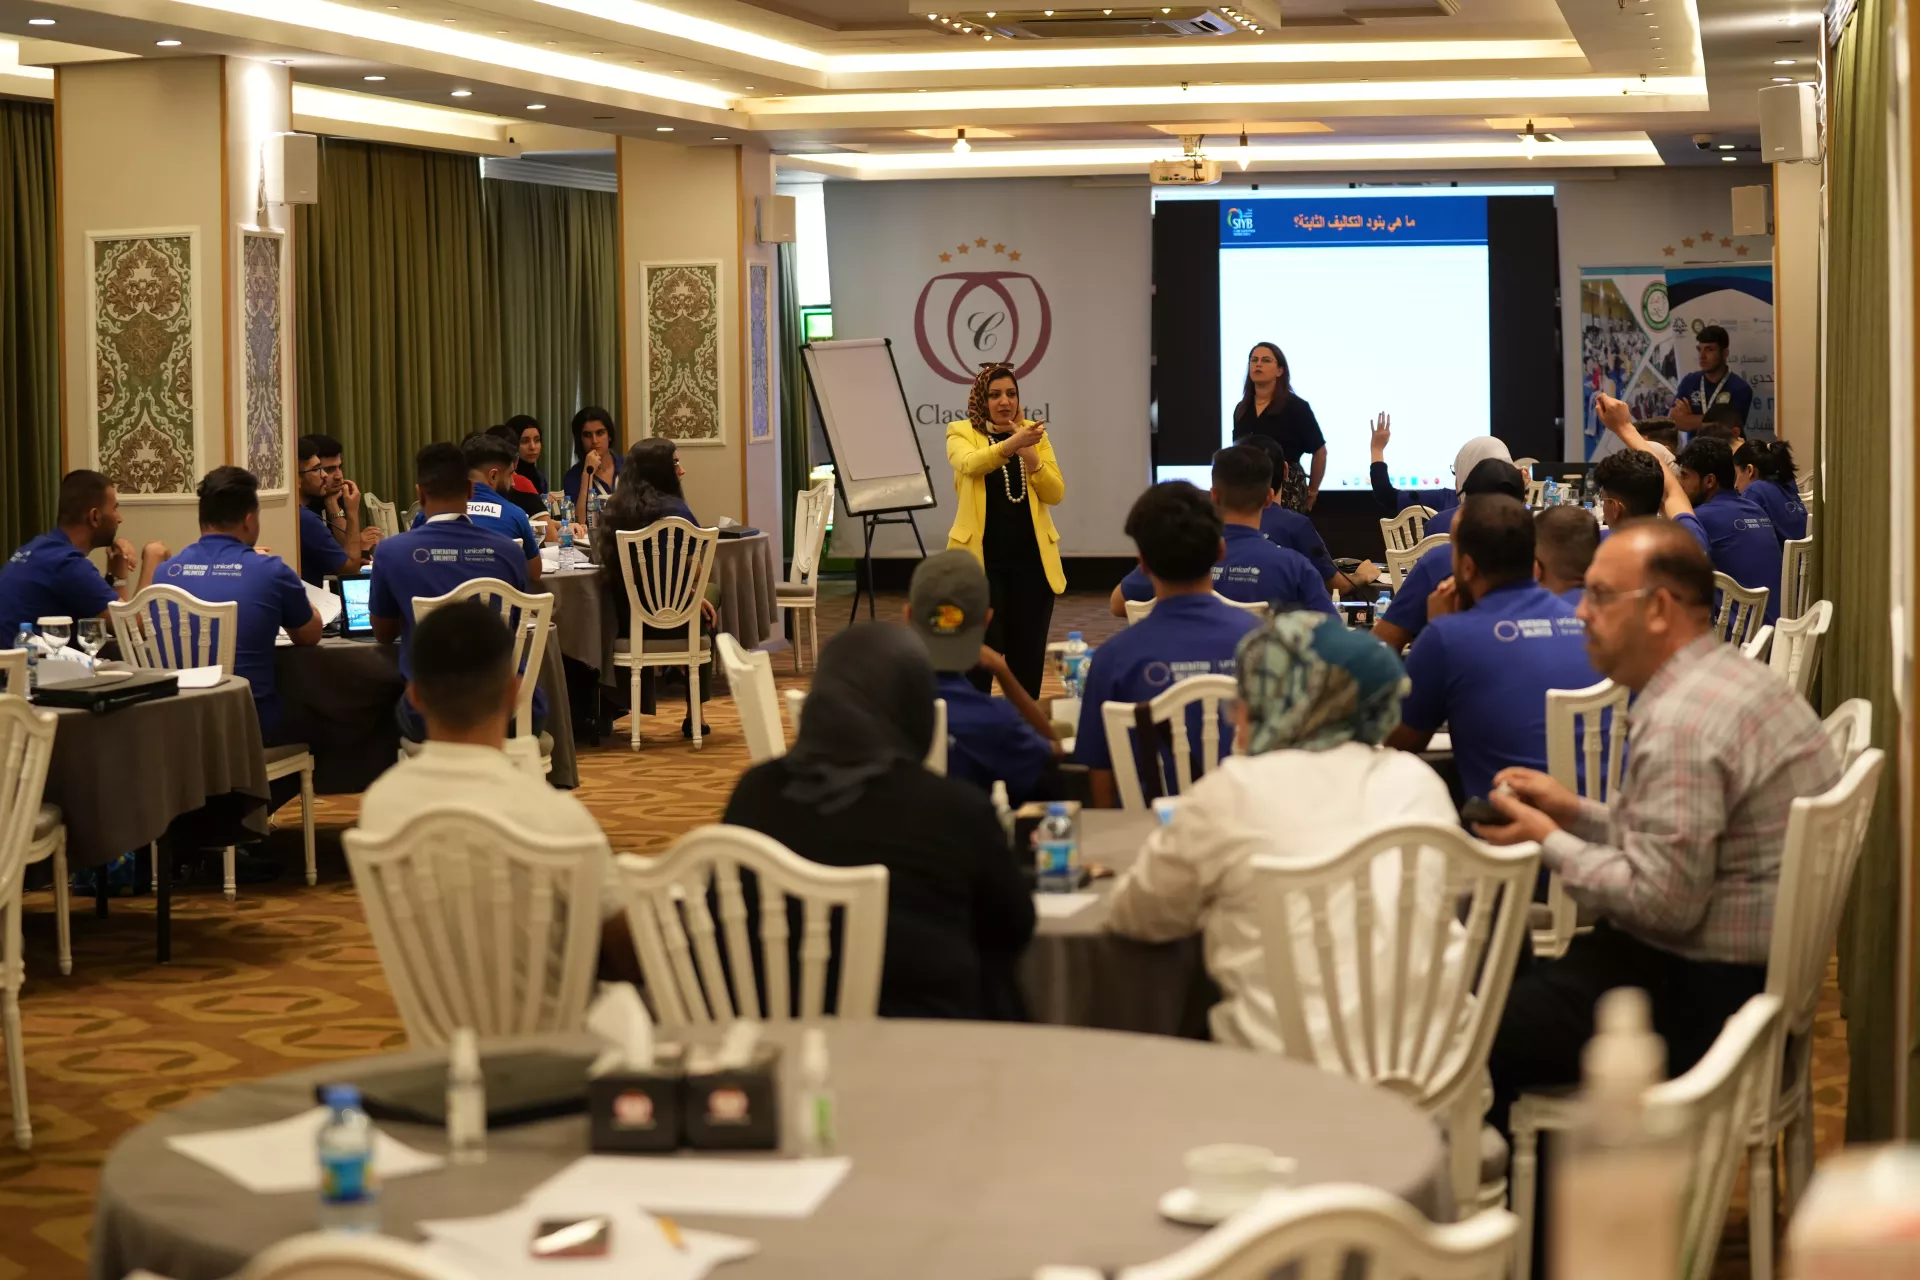 UNICEF jointly with the Ministry of Youth and Sports and NGO implemented partner supported a 5-days bootcamp for 10 selected teams to learn how to develop their entrepreneurial ideas